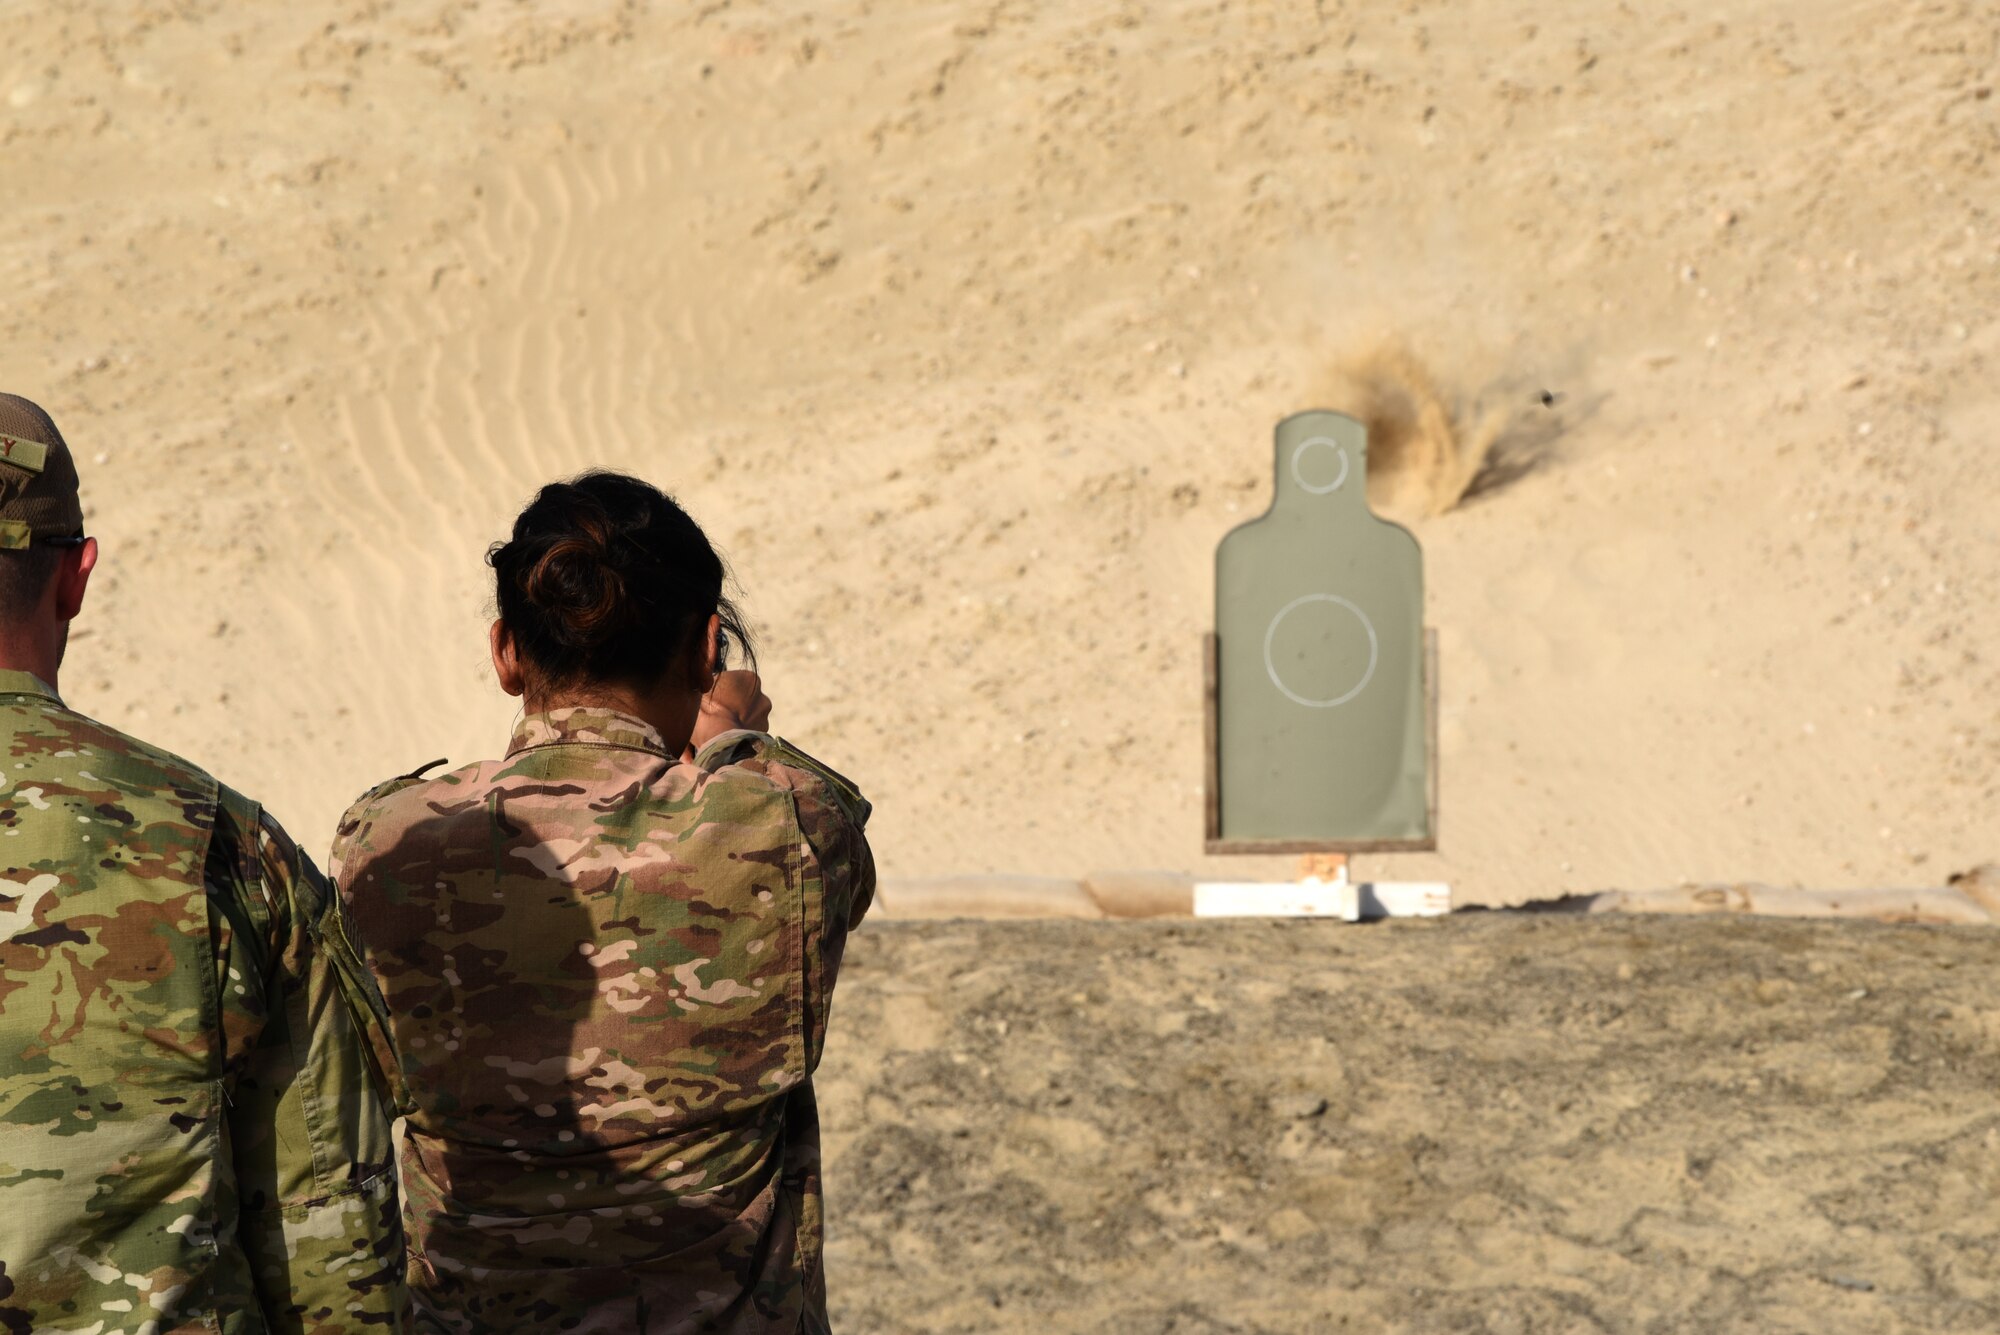 A member of the 380th Air Expeditionary Wing fires at a target during a pistol competition for Police Week 2019, May 13, 2019, at Al Dhafra Air Base, United Arab Emirates.